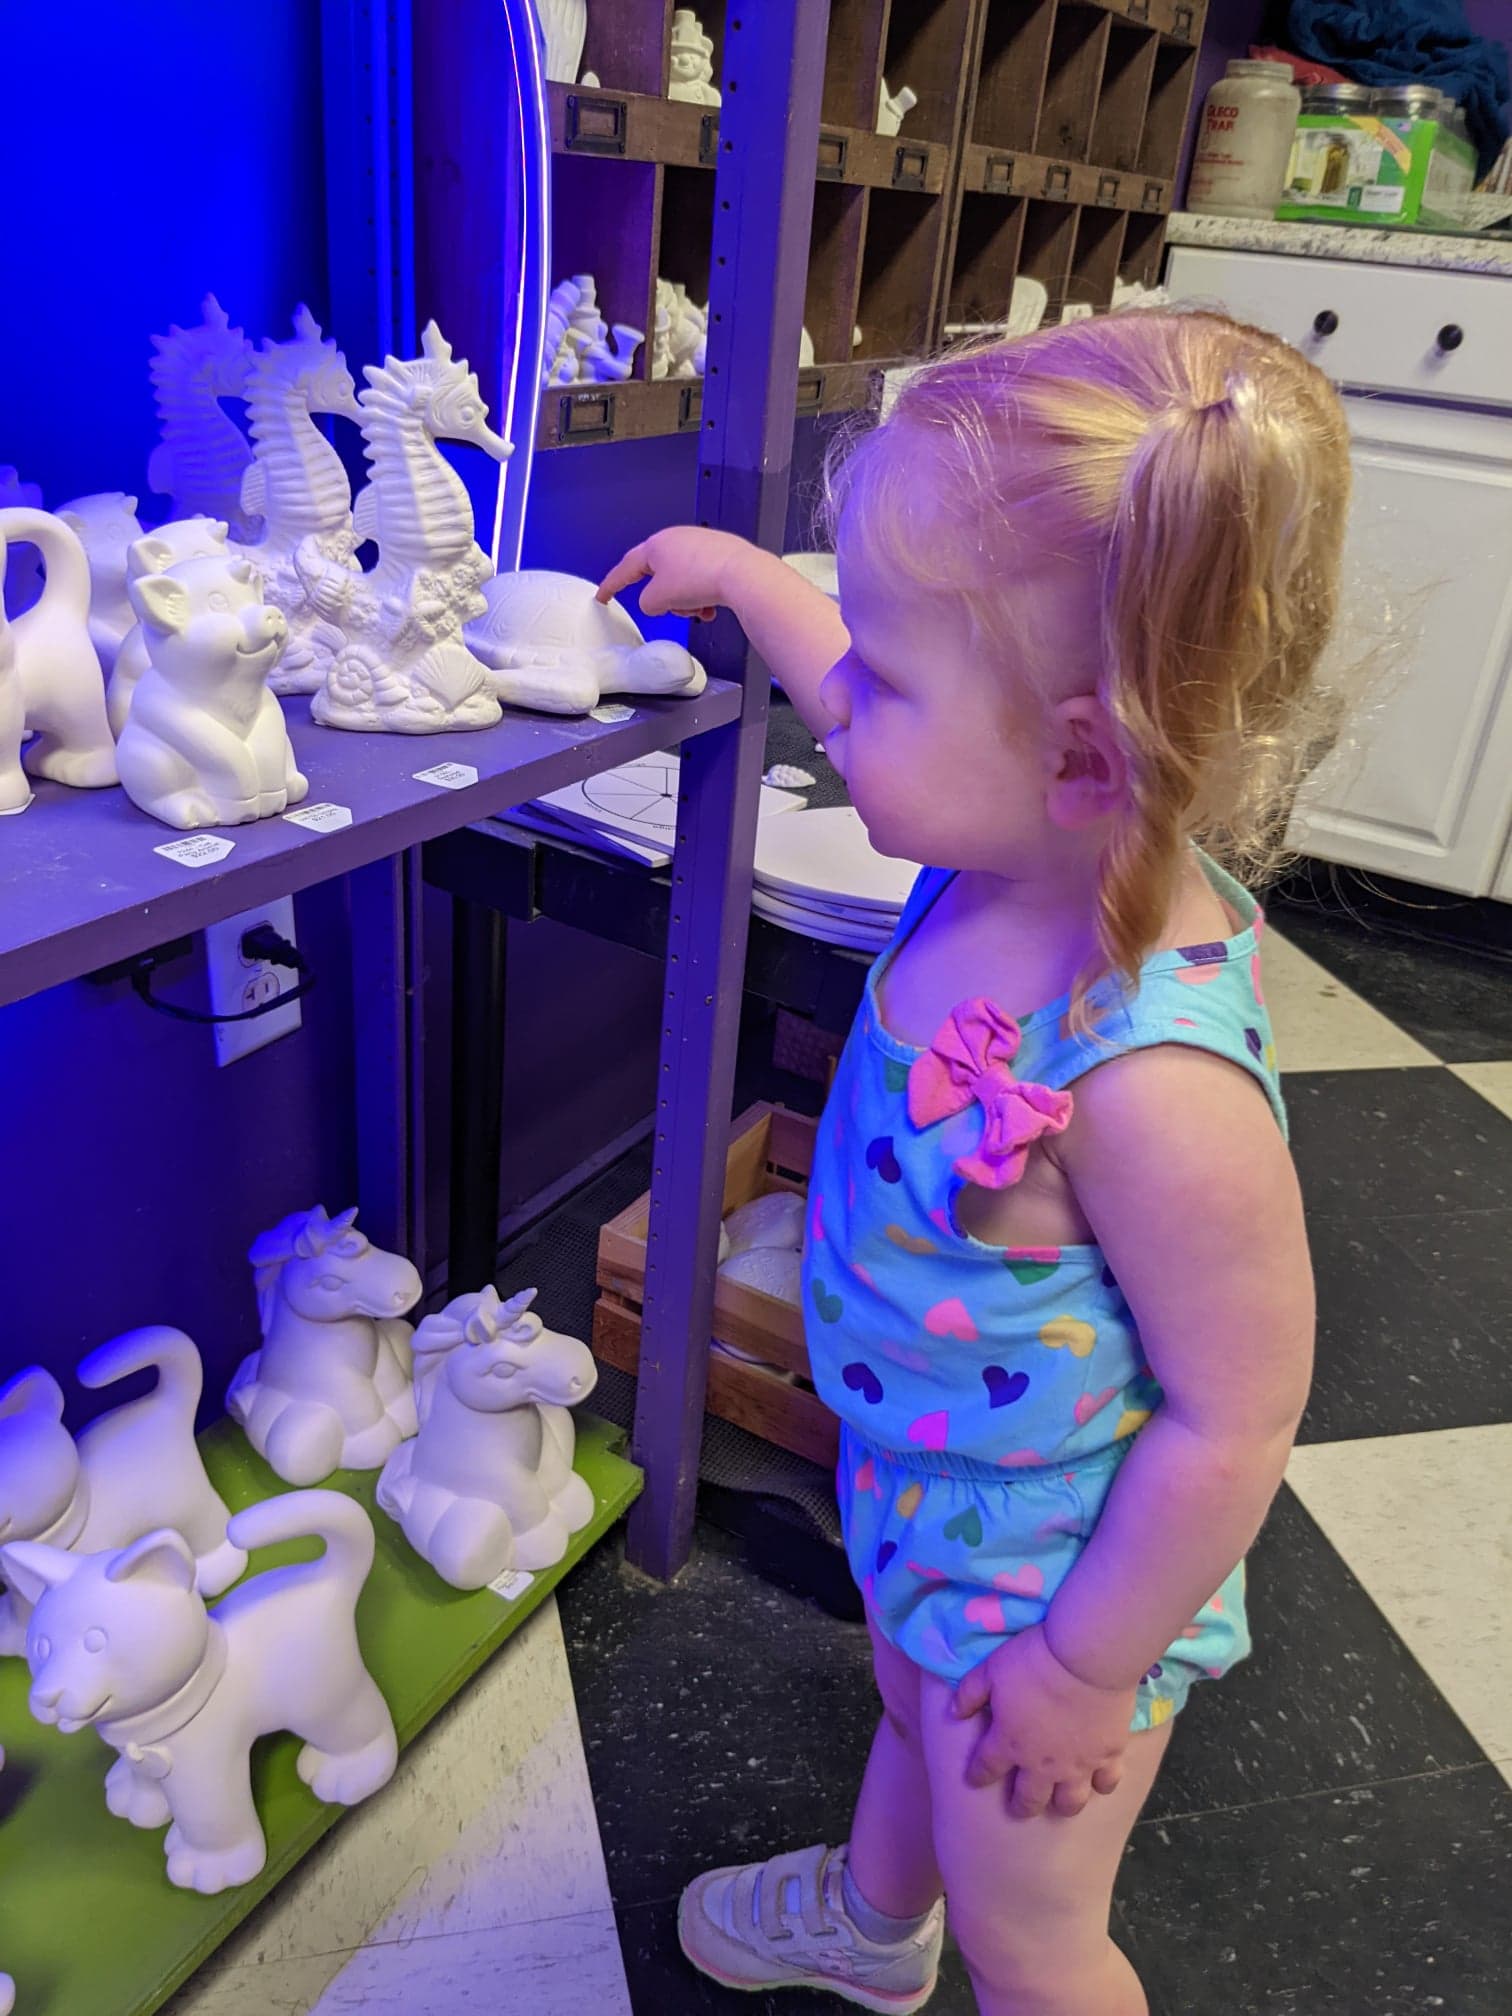 A little girl looking at some white ceramic figurines.